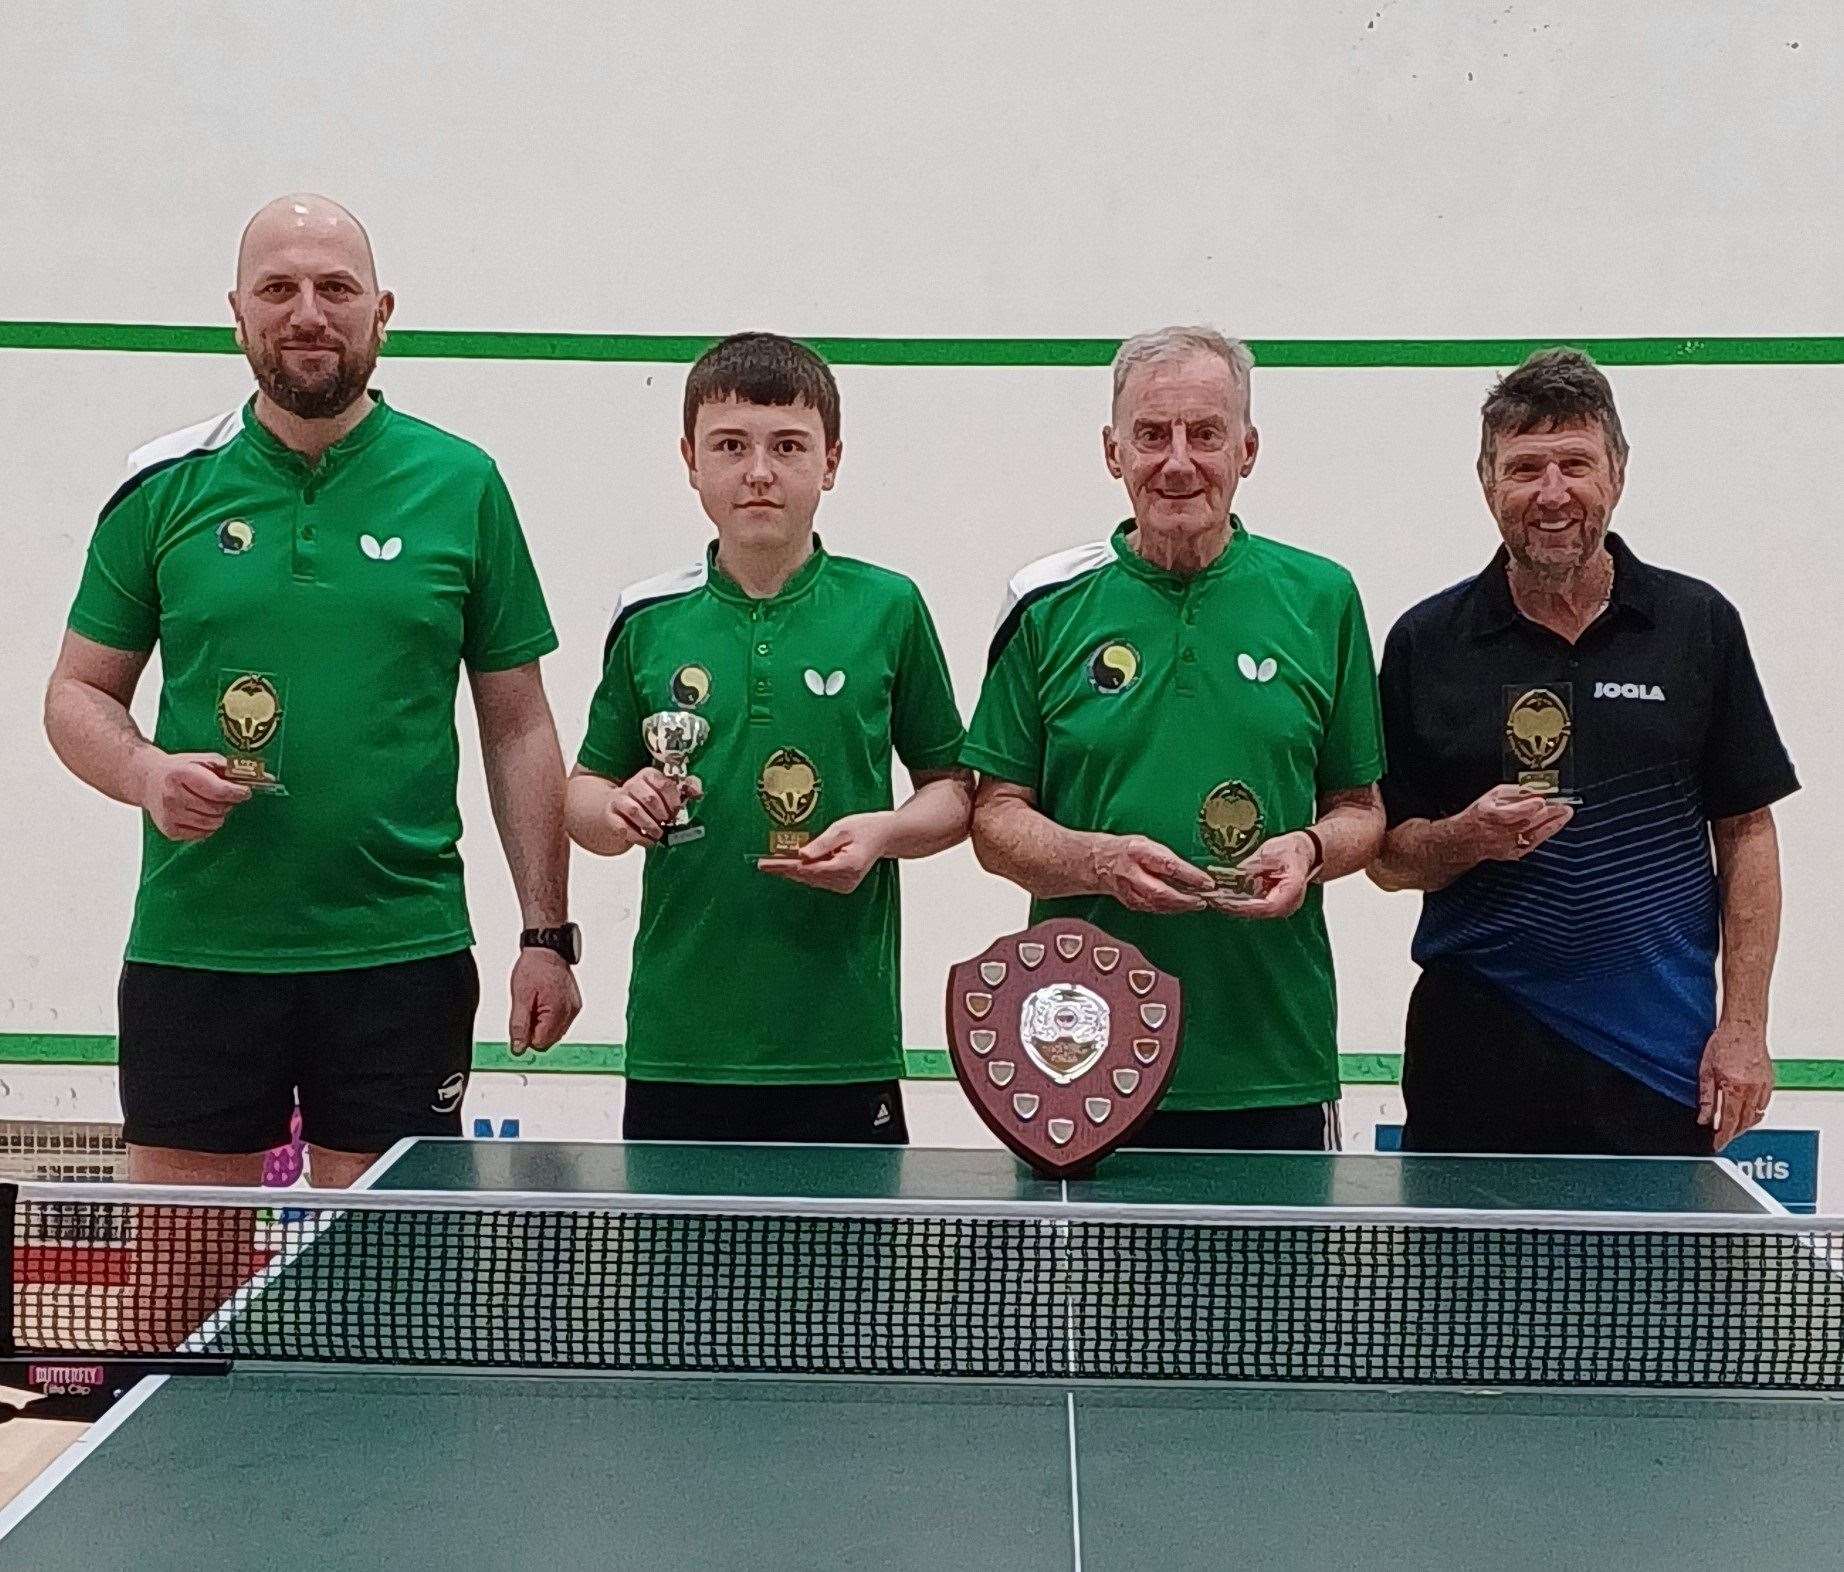 The victorious Inverness A table tennis team: Lukasz Chudek, Connor Cadden, Mike Dow (captain) and Arthur Laws.